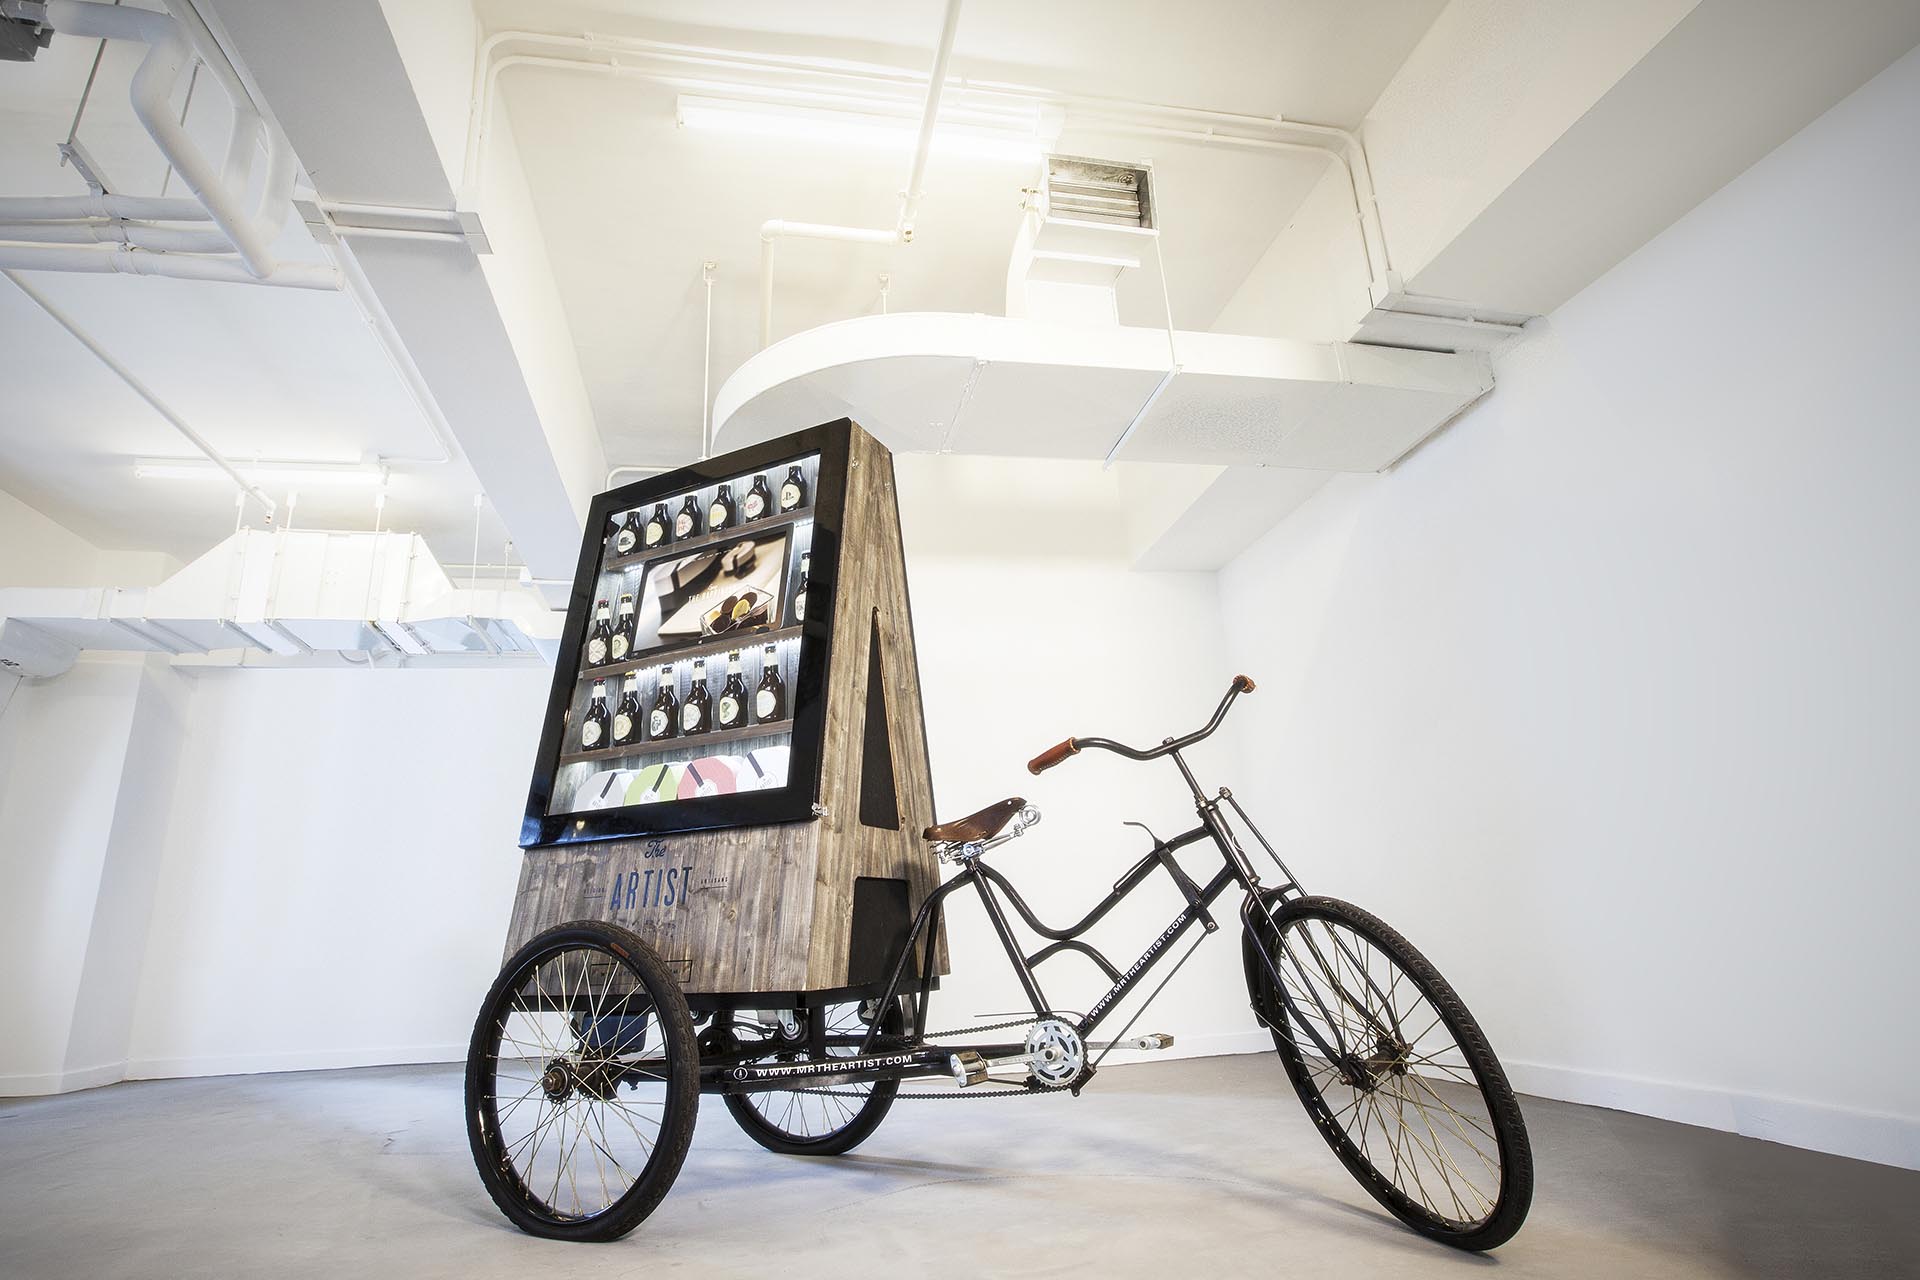 pop up shop, beer, chocolate, tricycle, retail. popup, hong kong, vintage, mrtheartist, mobile shop, old